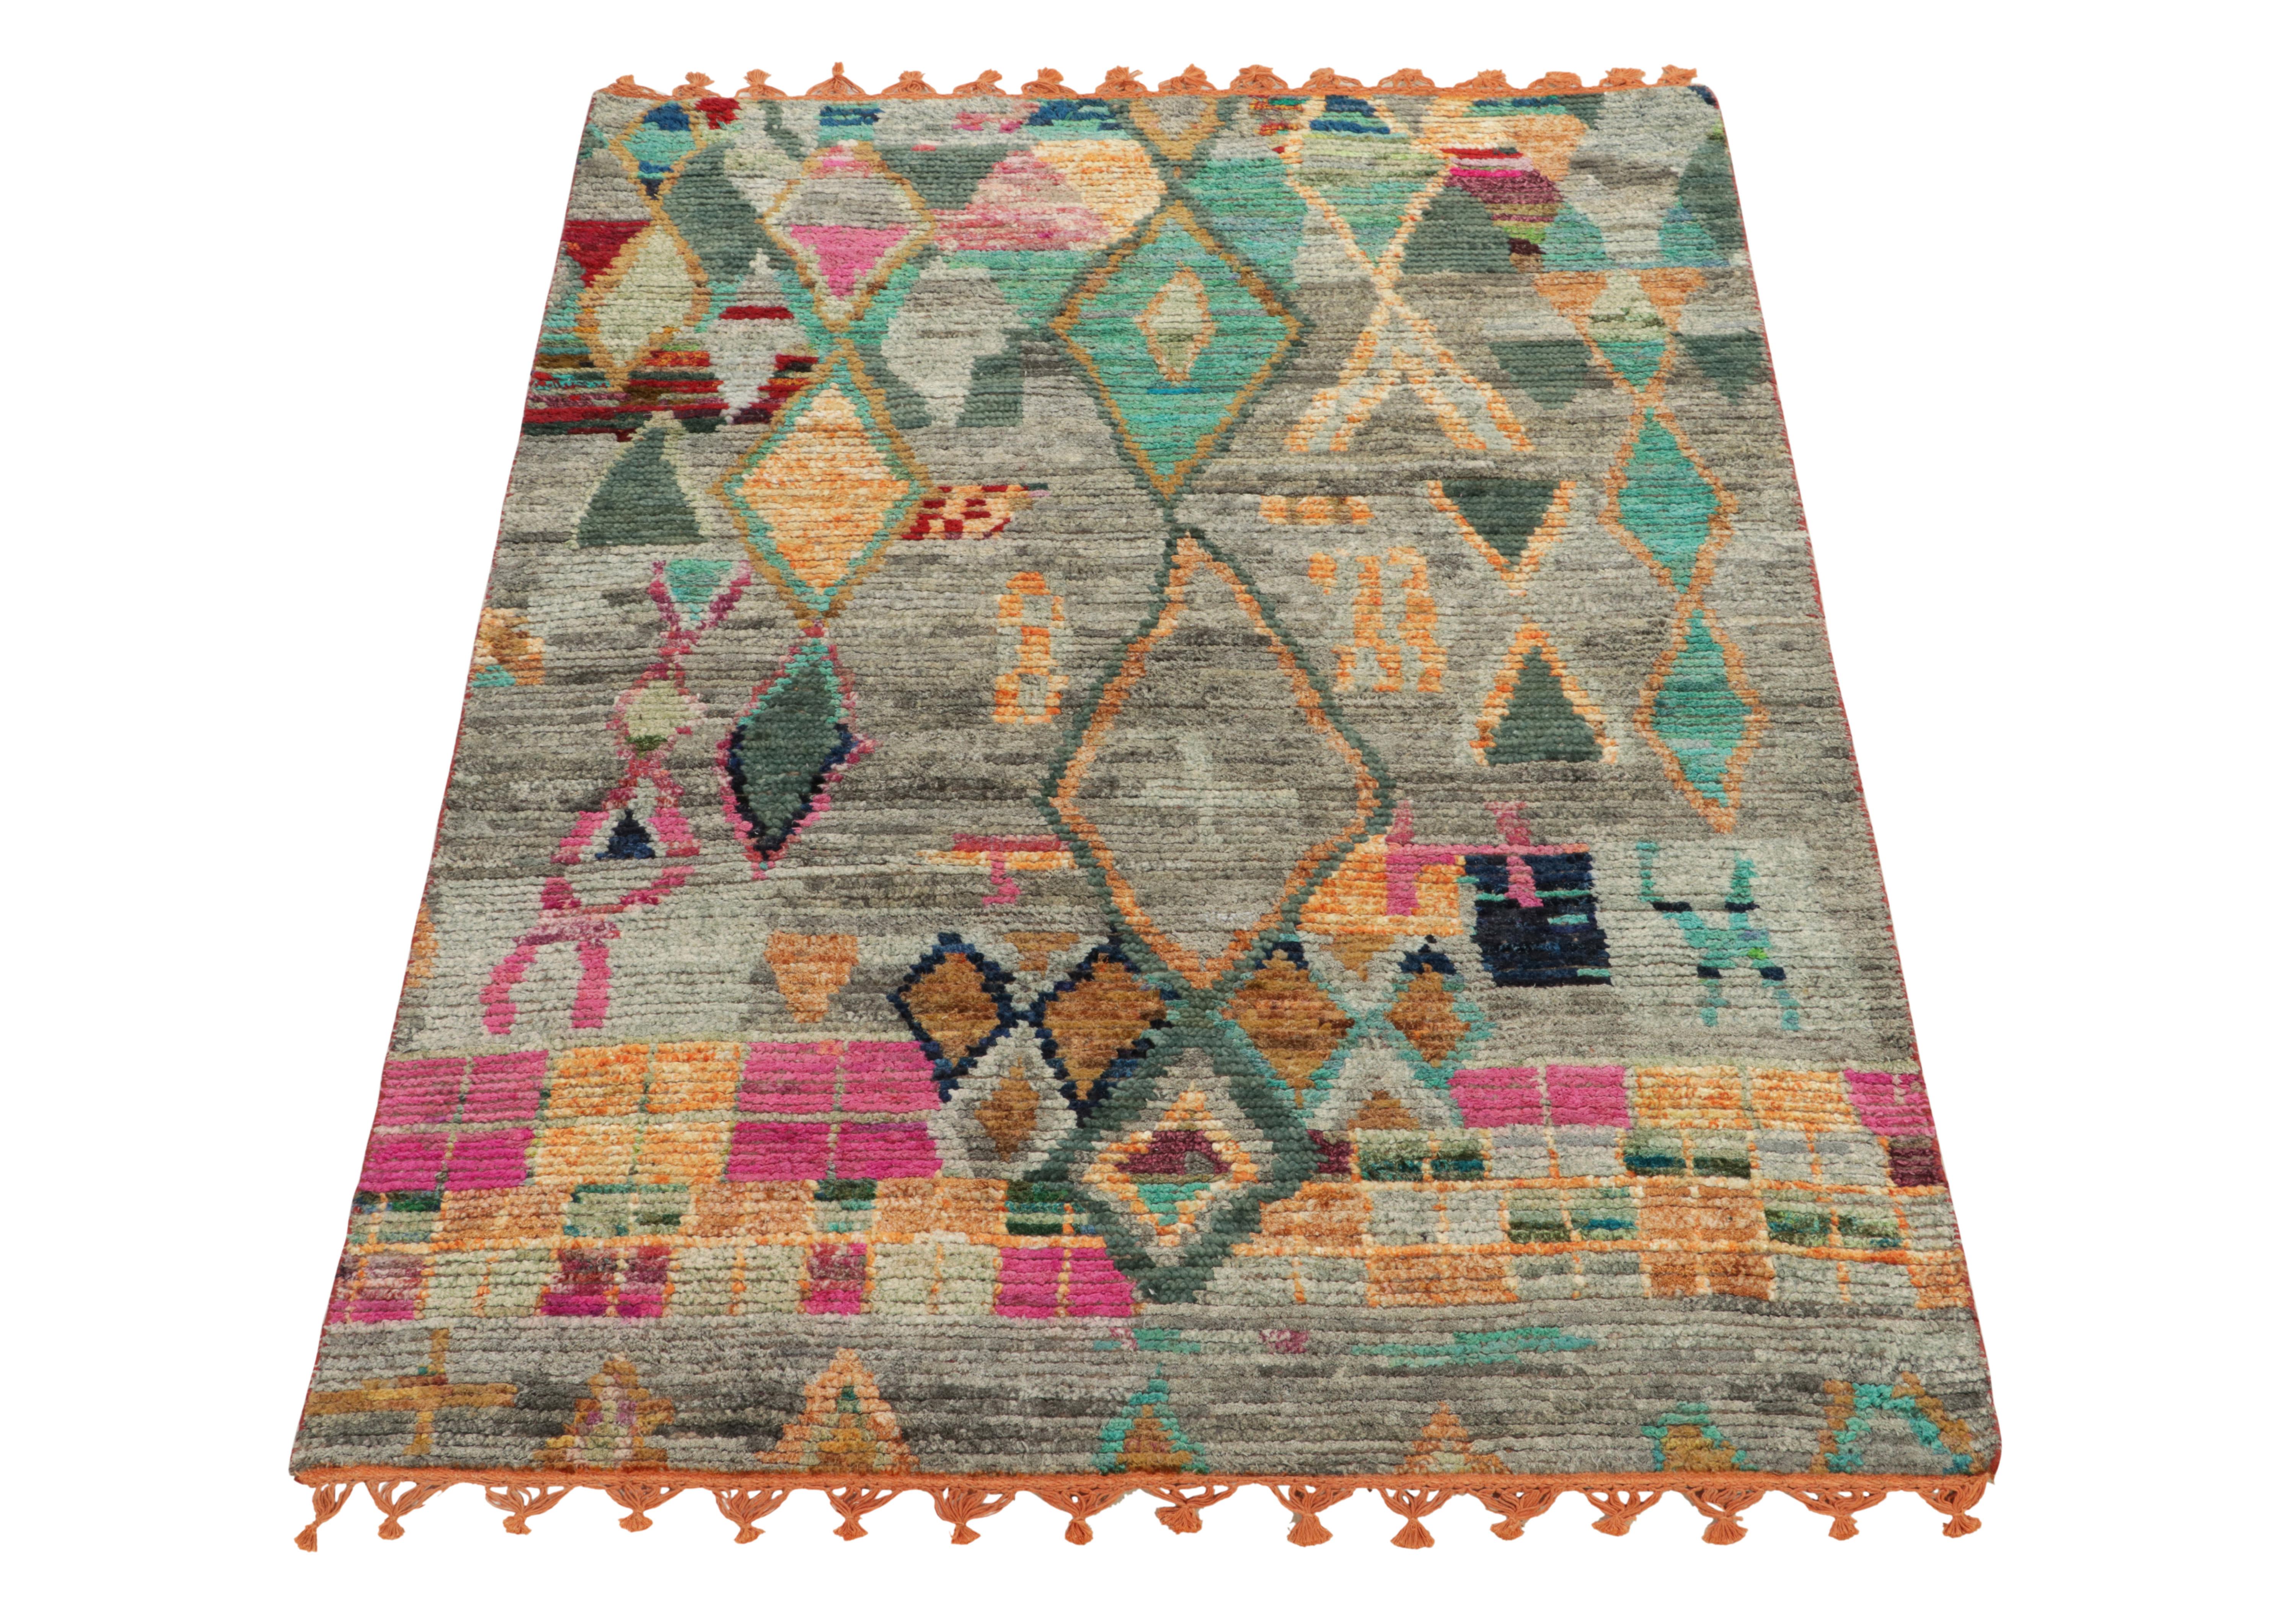 Hand-knotted in silk, this piece marks Rug & Kilim’s bold modern take on celebrated Moroccan rug designs, joining their titular collection. 

The 4x6 carpet is an ode to the tribal boucherouite style of weaving with our own spin on mild ribbing—a